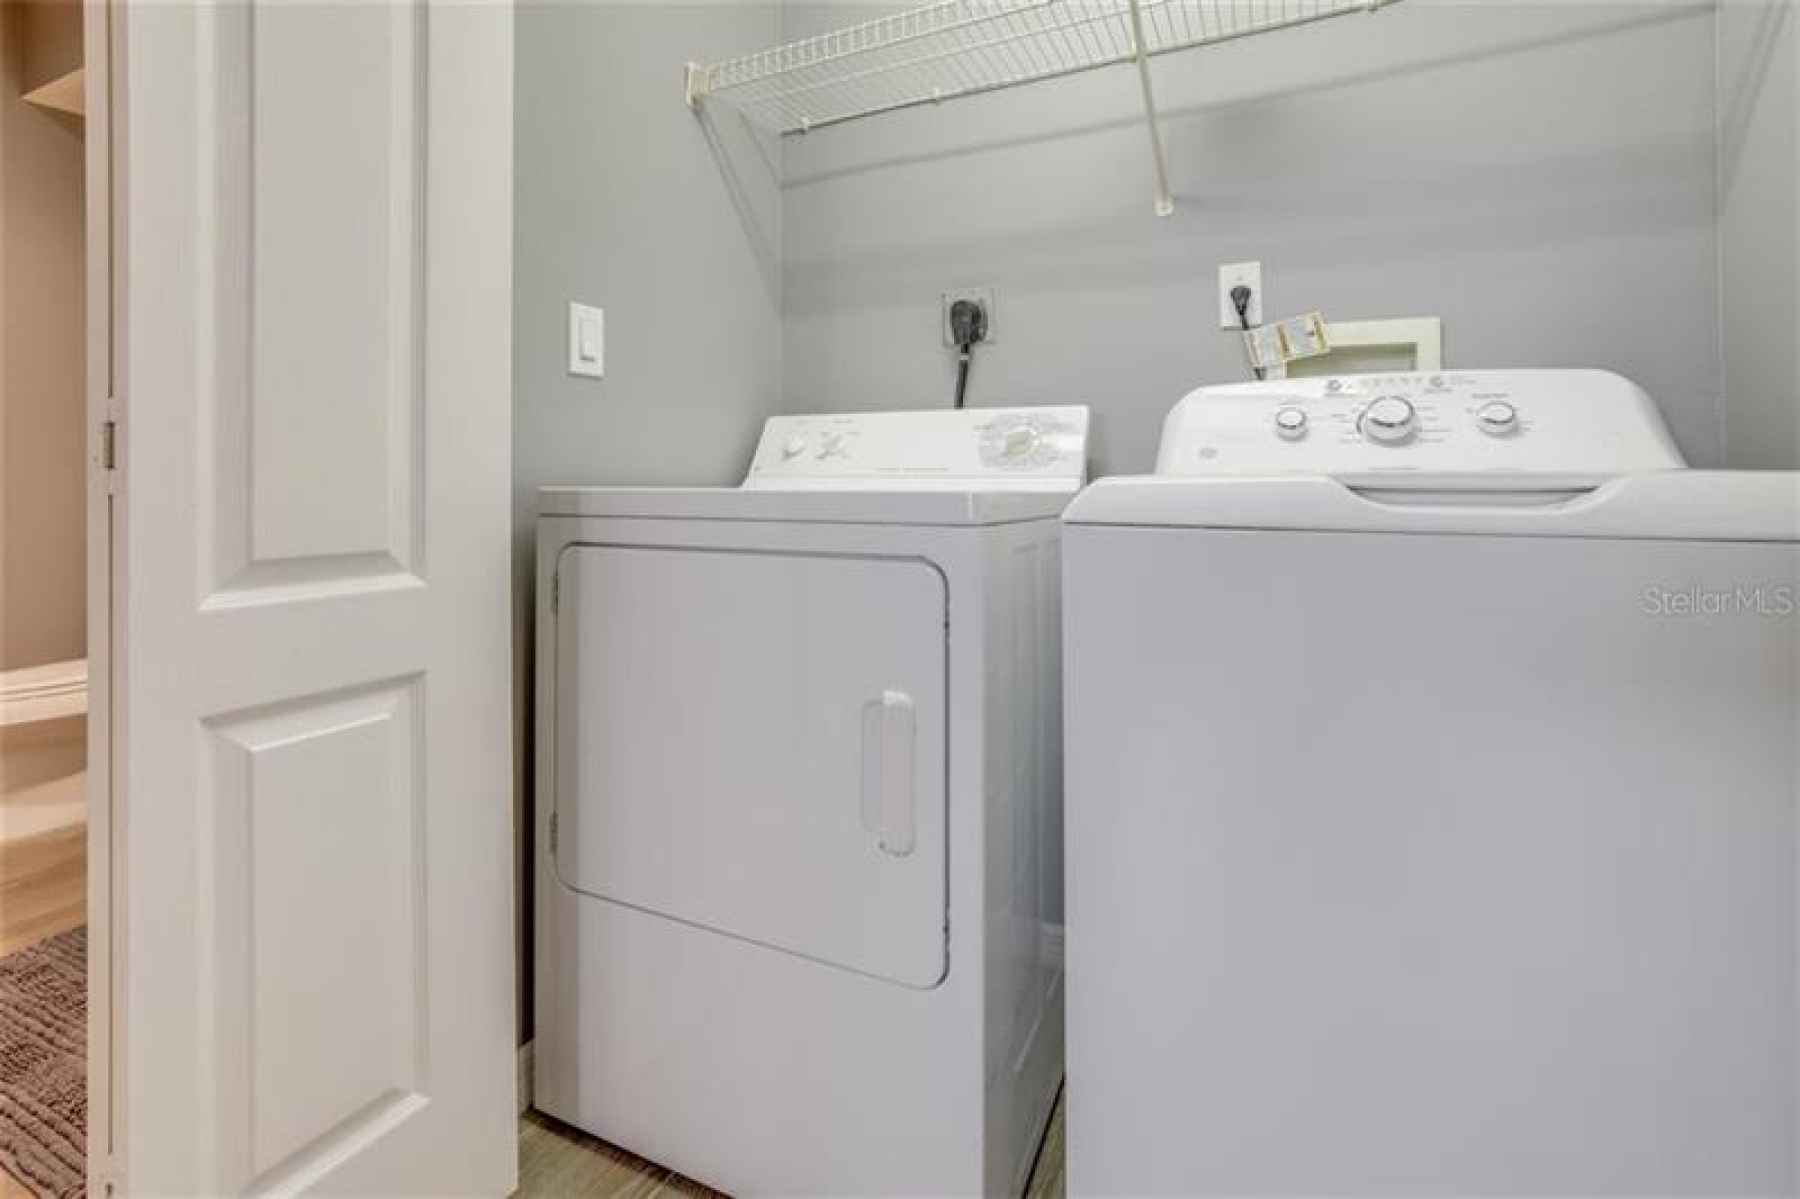 Full washer and dryer with storage